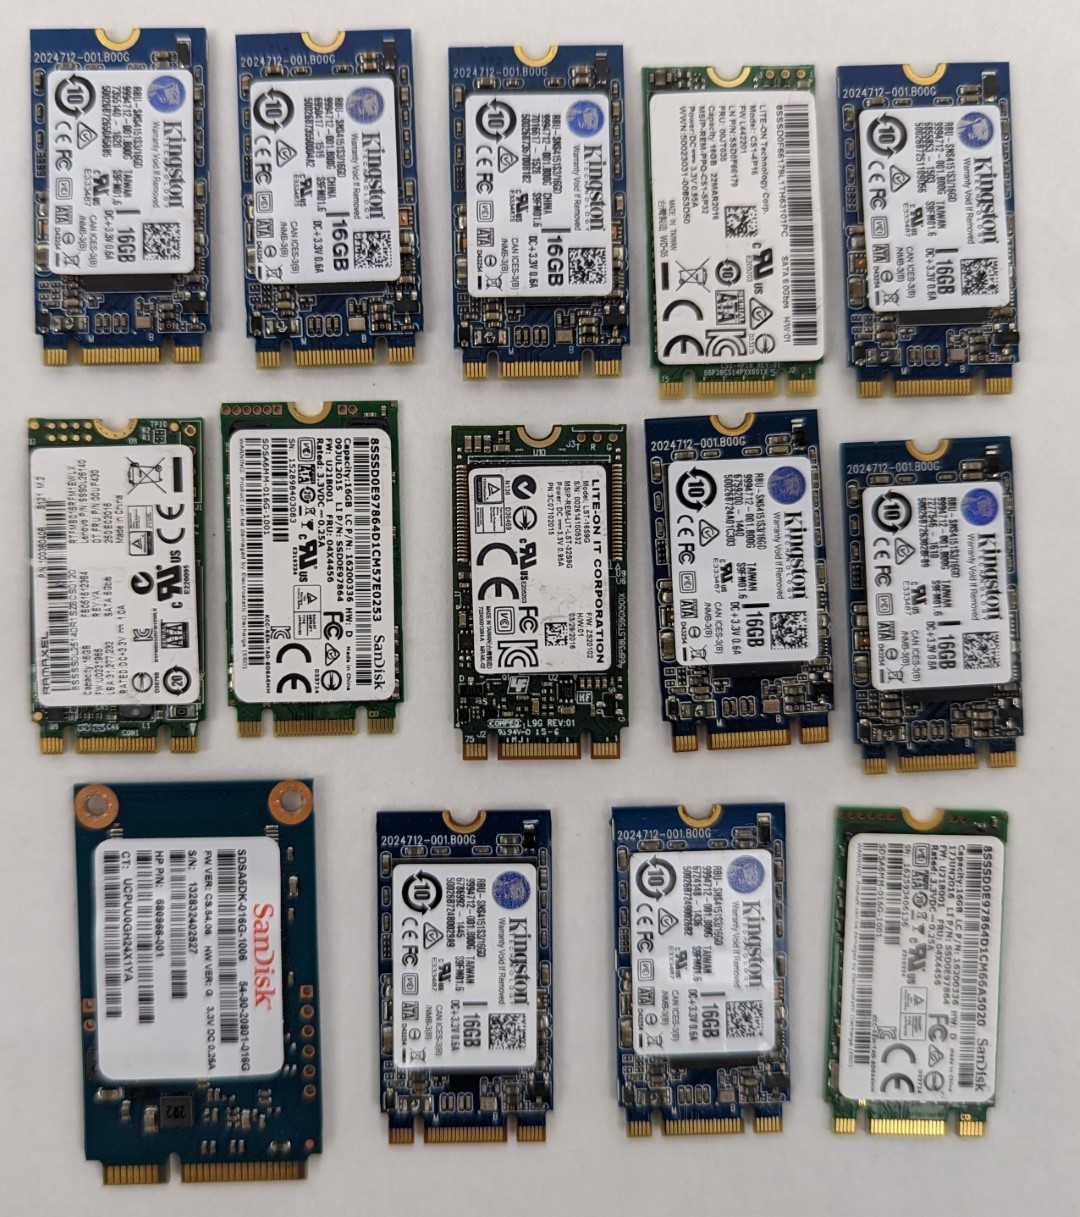 Lot of 14 units of 16GB SSD 